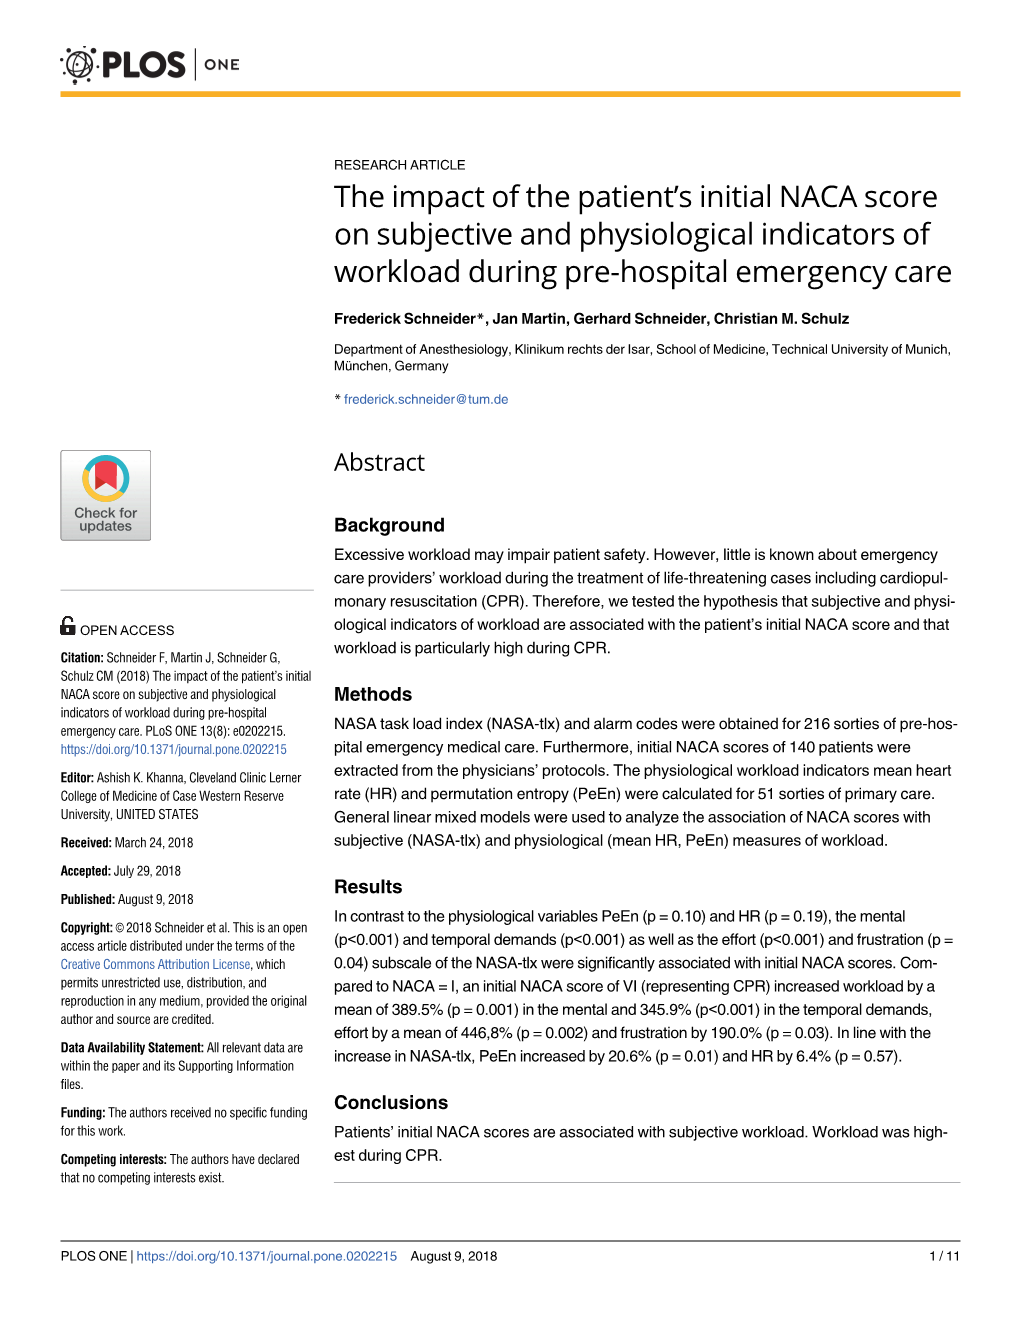 The Impact of the Patient's Initial NACA Score on Subjective and Physiological Indicators of Workload During Pre-Hospital Emergency Care